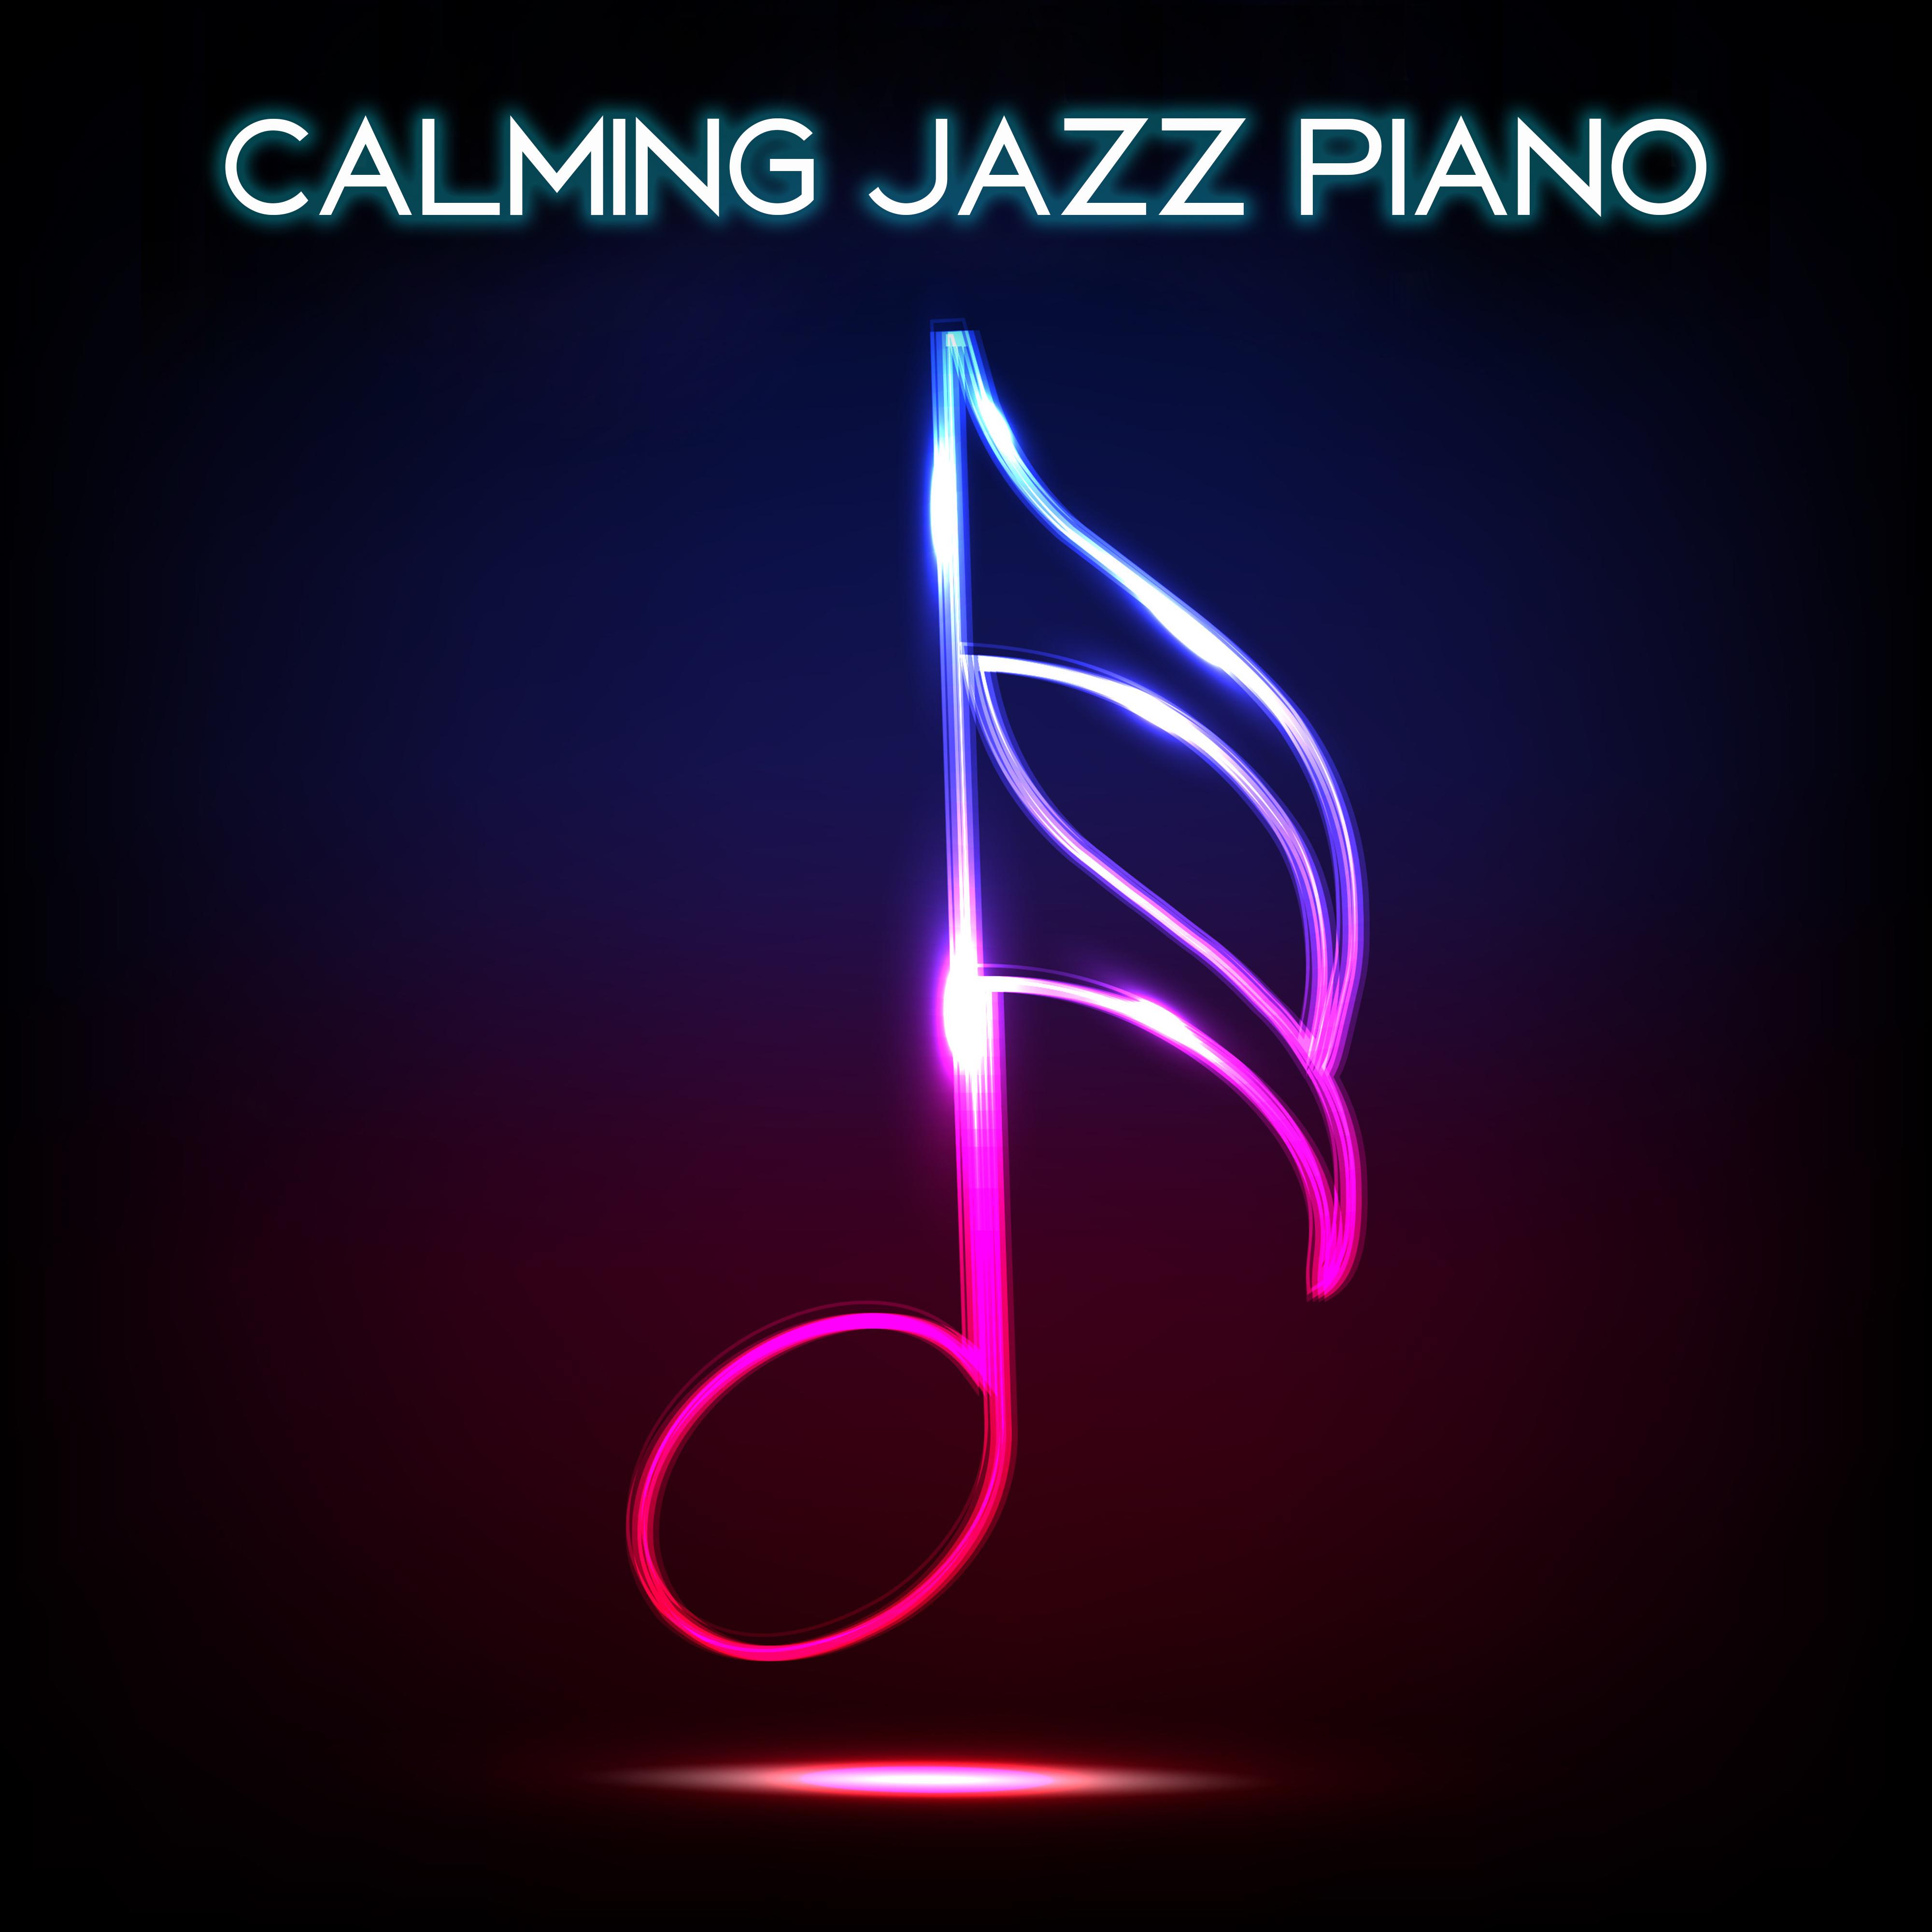 Calming Jazz Piano  Relaxed Jazz, Smooth Jazz Melodies, Instrumental Songs, Easy Listening, Music for Restaurant